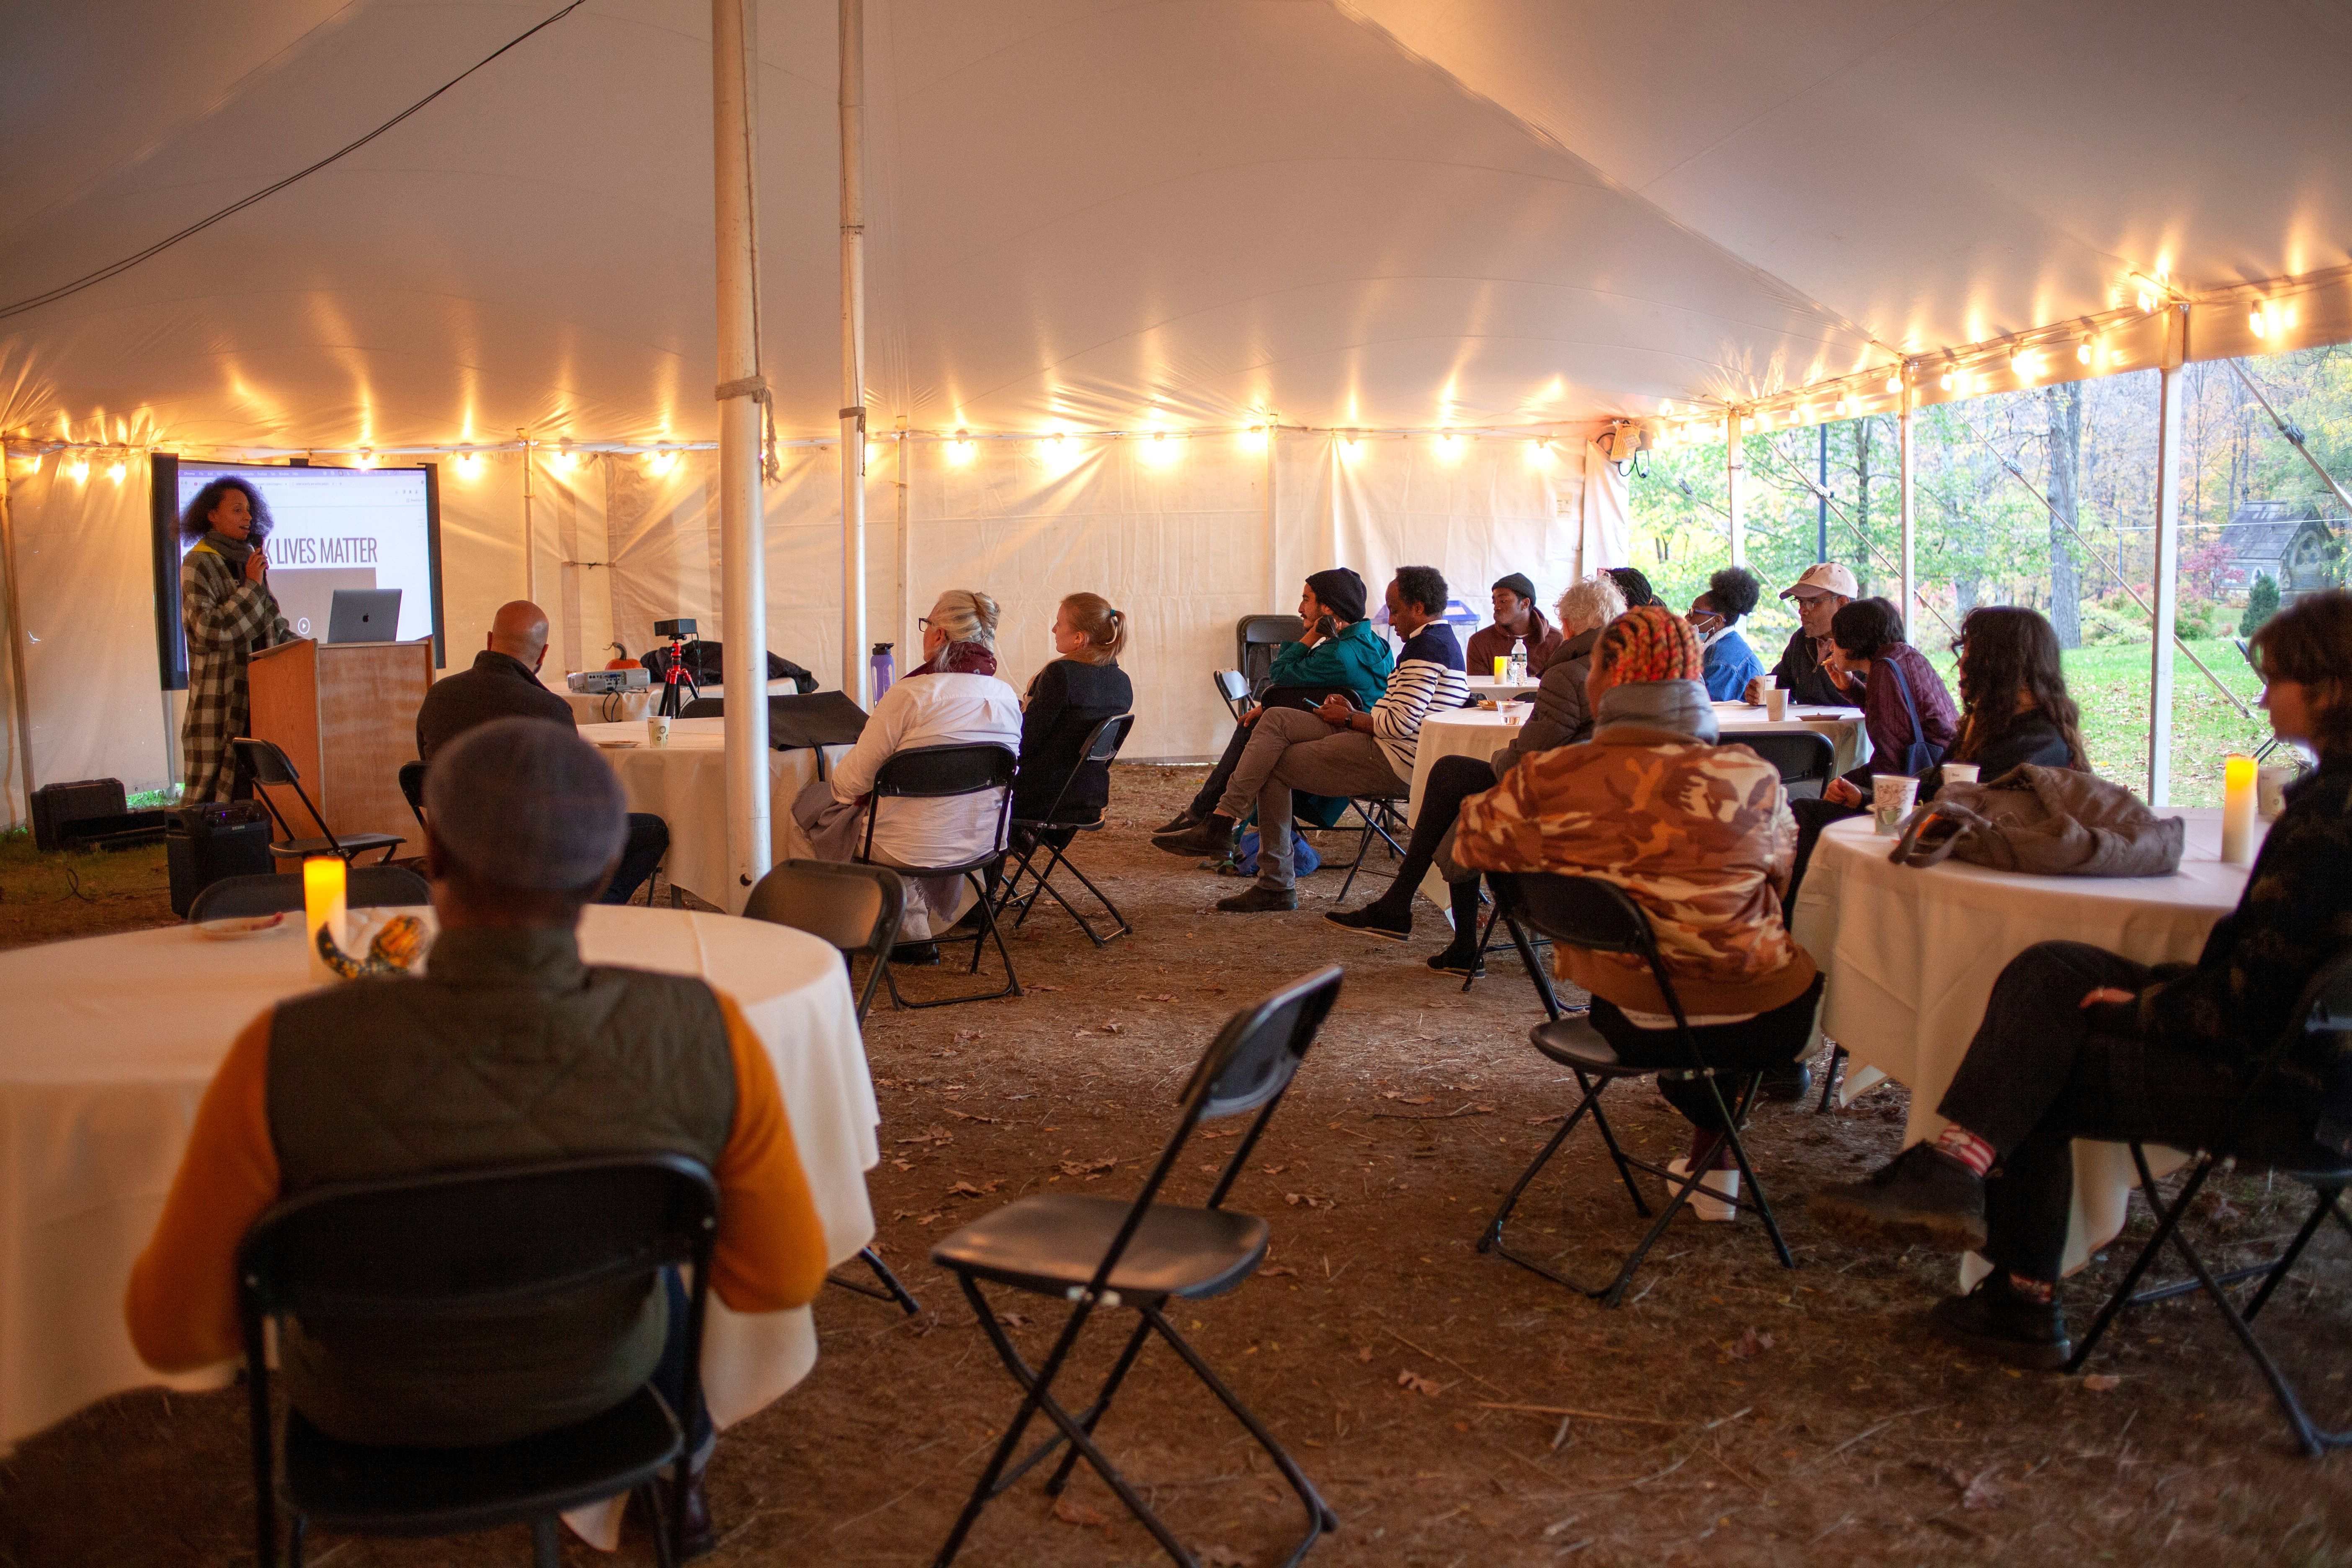 People under a white tent at white-clothed, circular tables sit, watching a presenter speak (Powerpoint slide reads: Black Lives Matter)